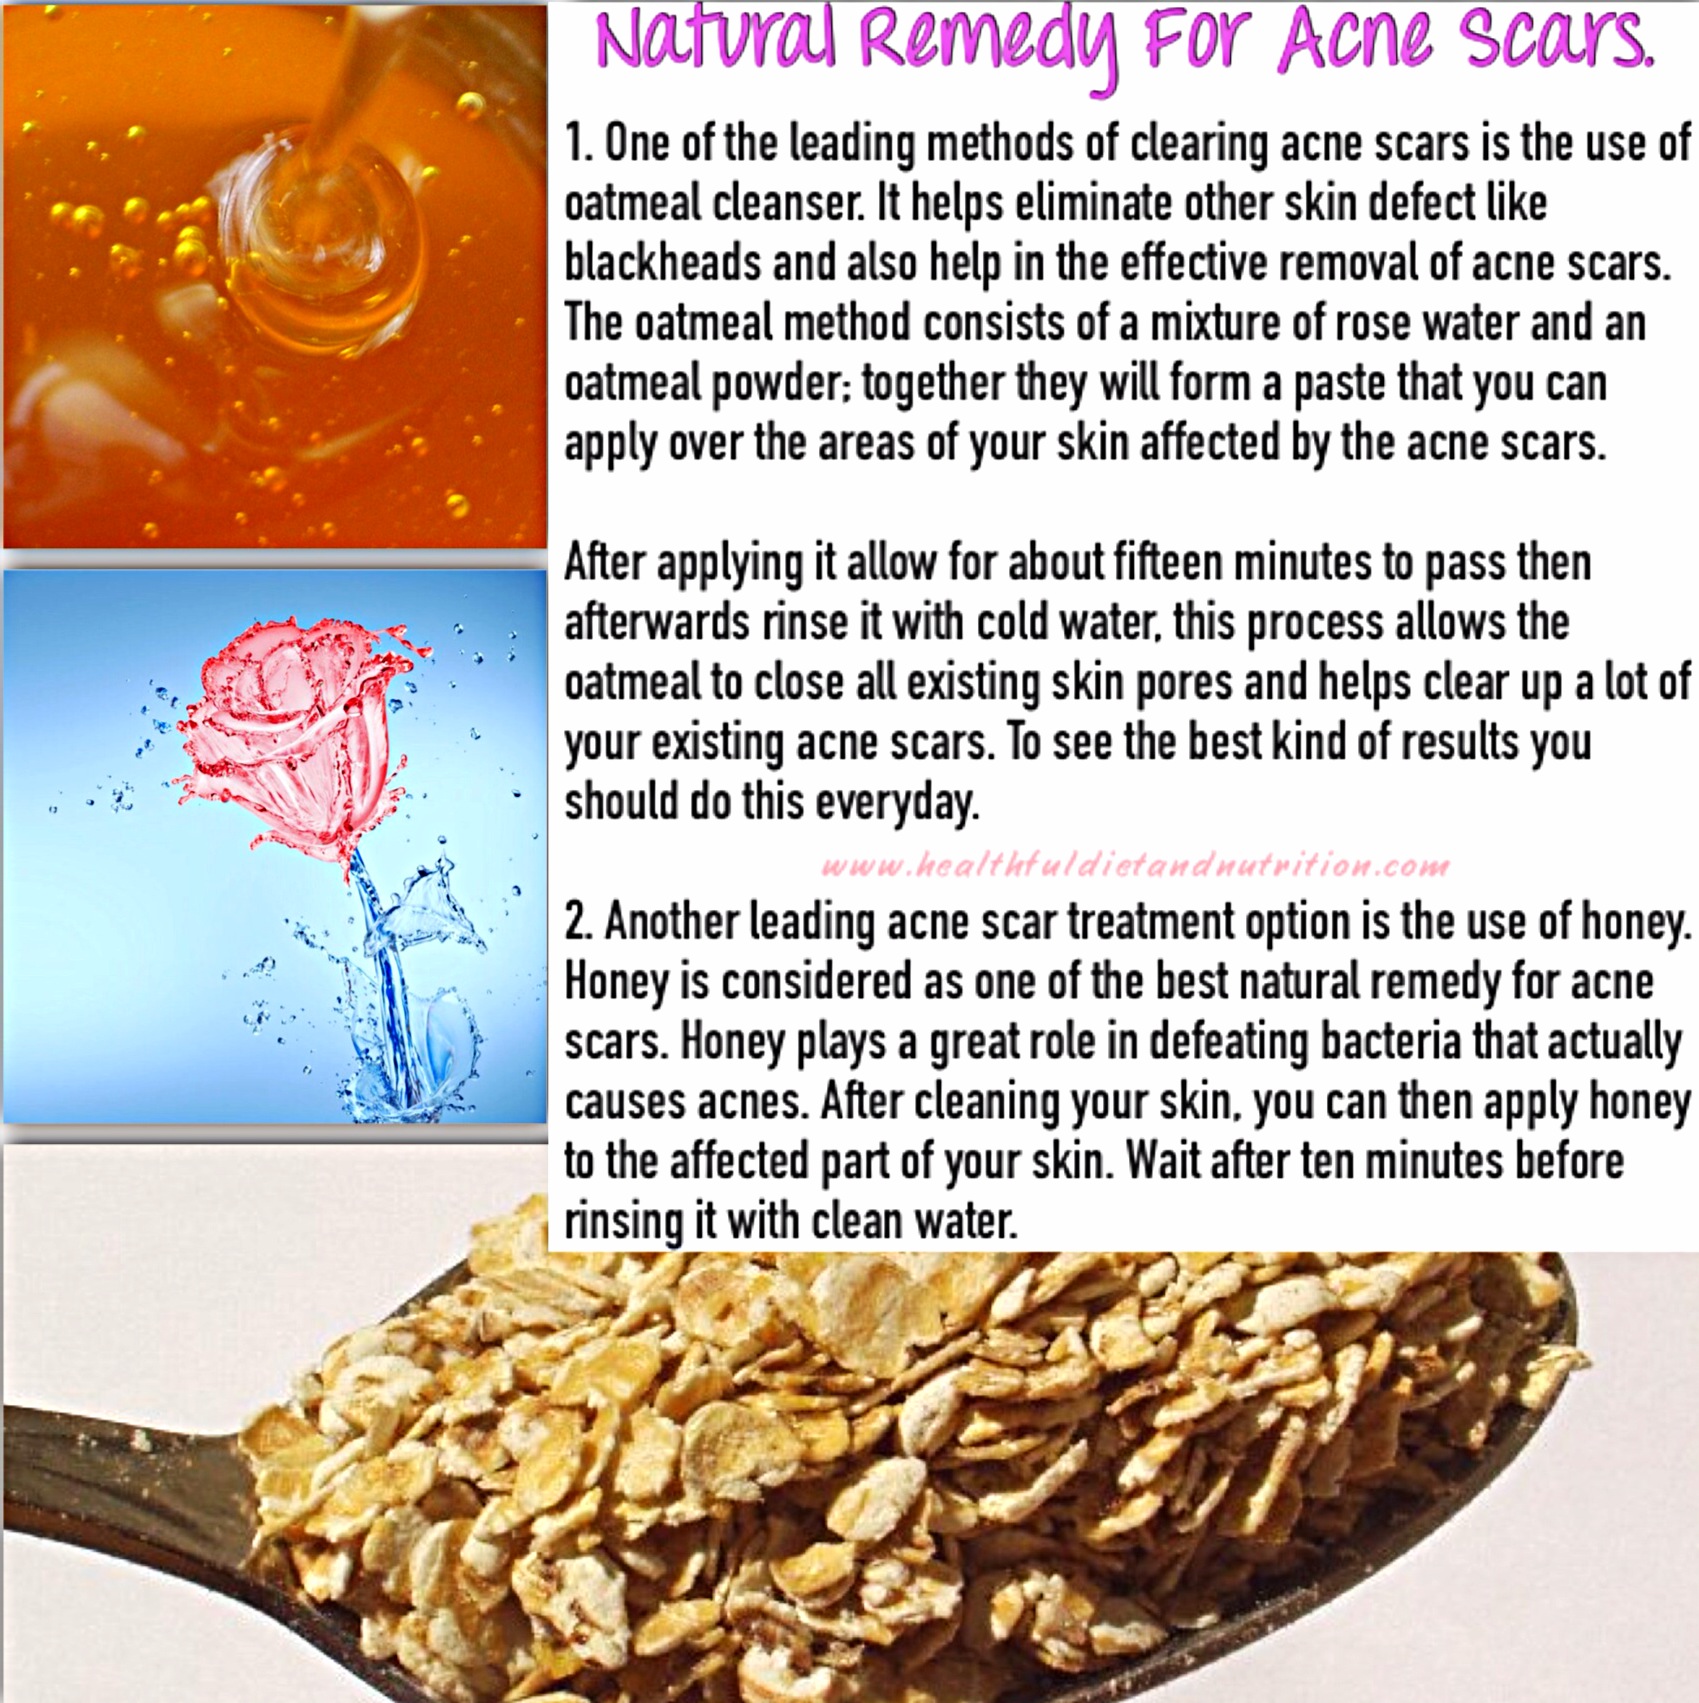 Natural Remedies For Acne Scars